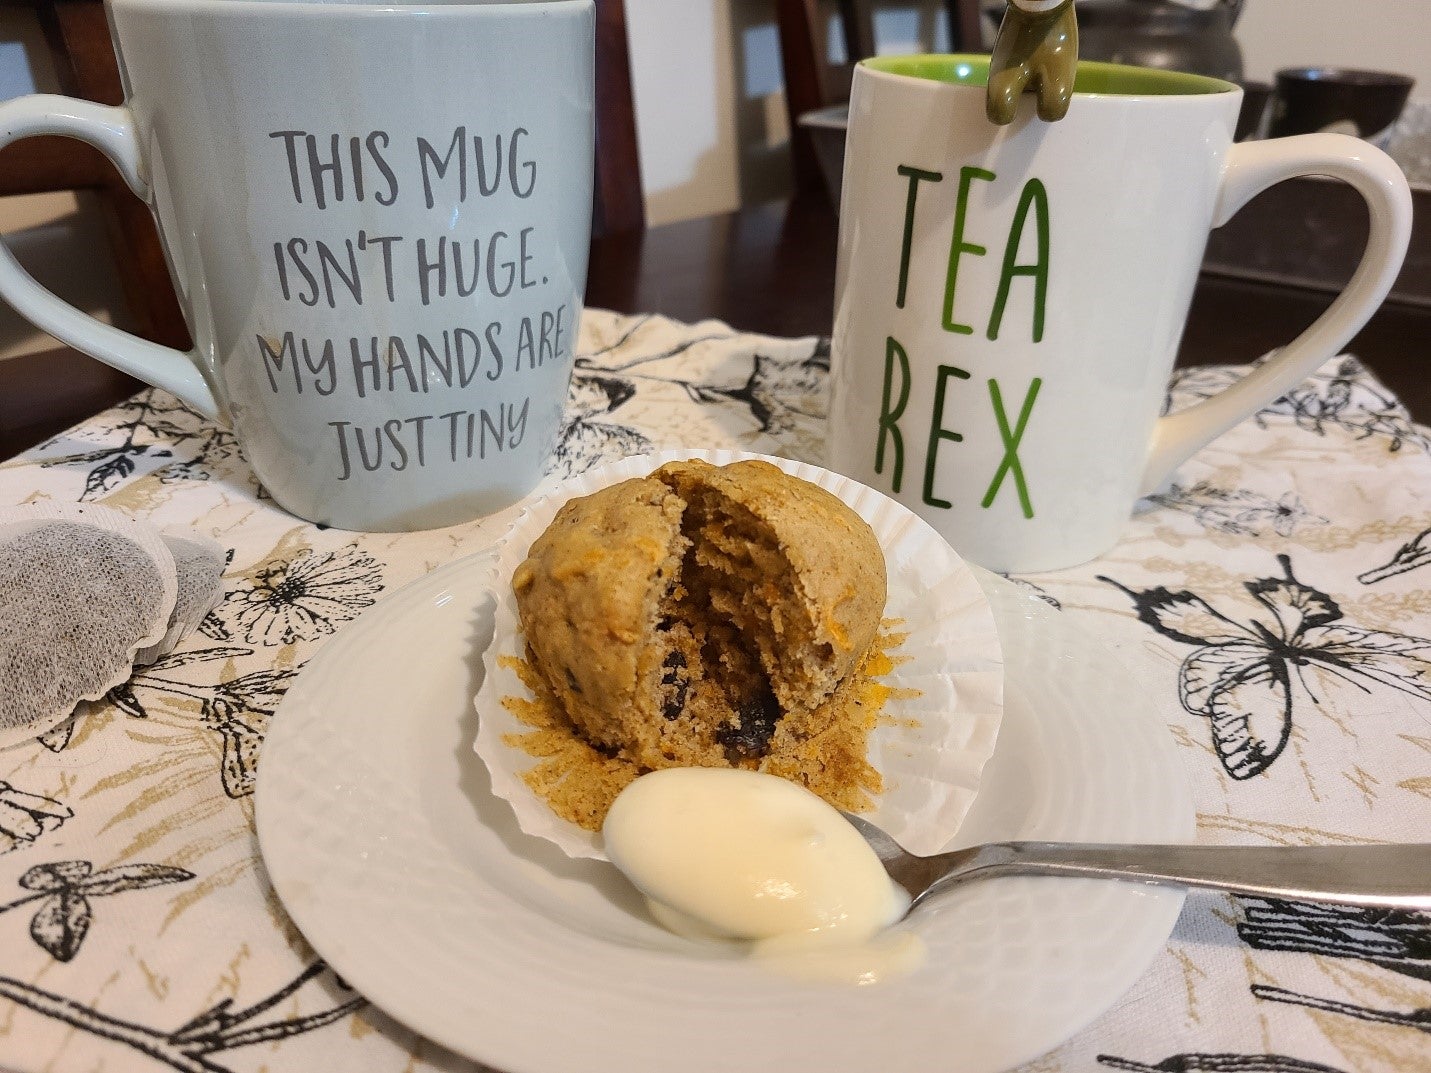 Carrot muffing with a spoonful of vanilla pudding on a small plate. In the background are two mugs of black tea. One reads “This mug isn’t huge. My hands are just tiny” and the other “Tea Rex”.